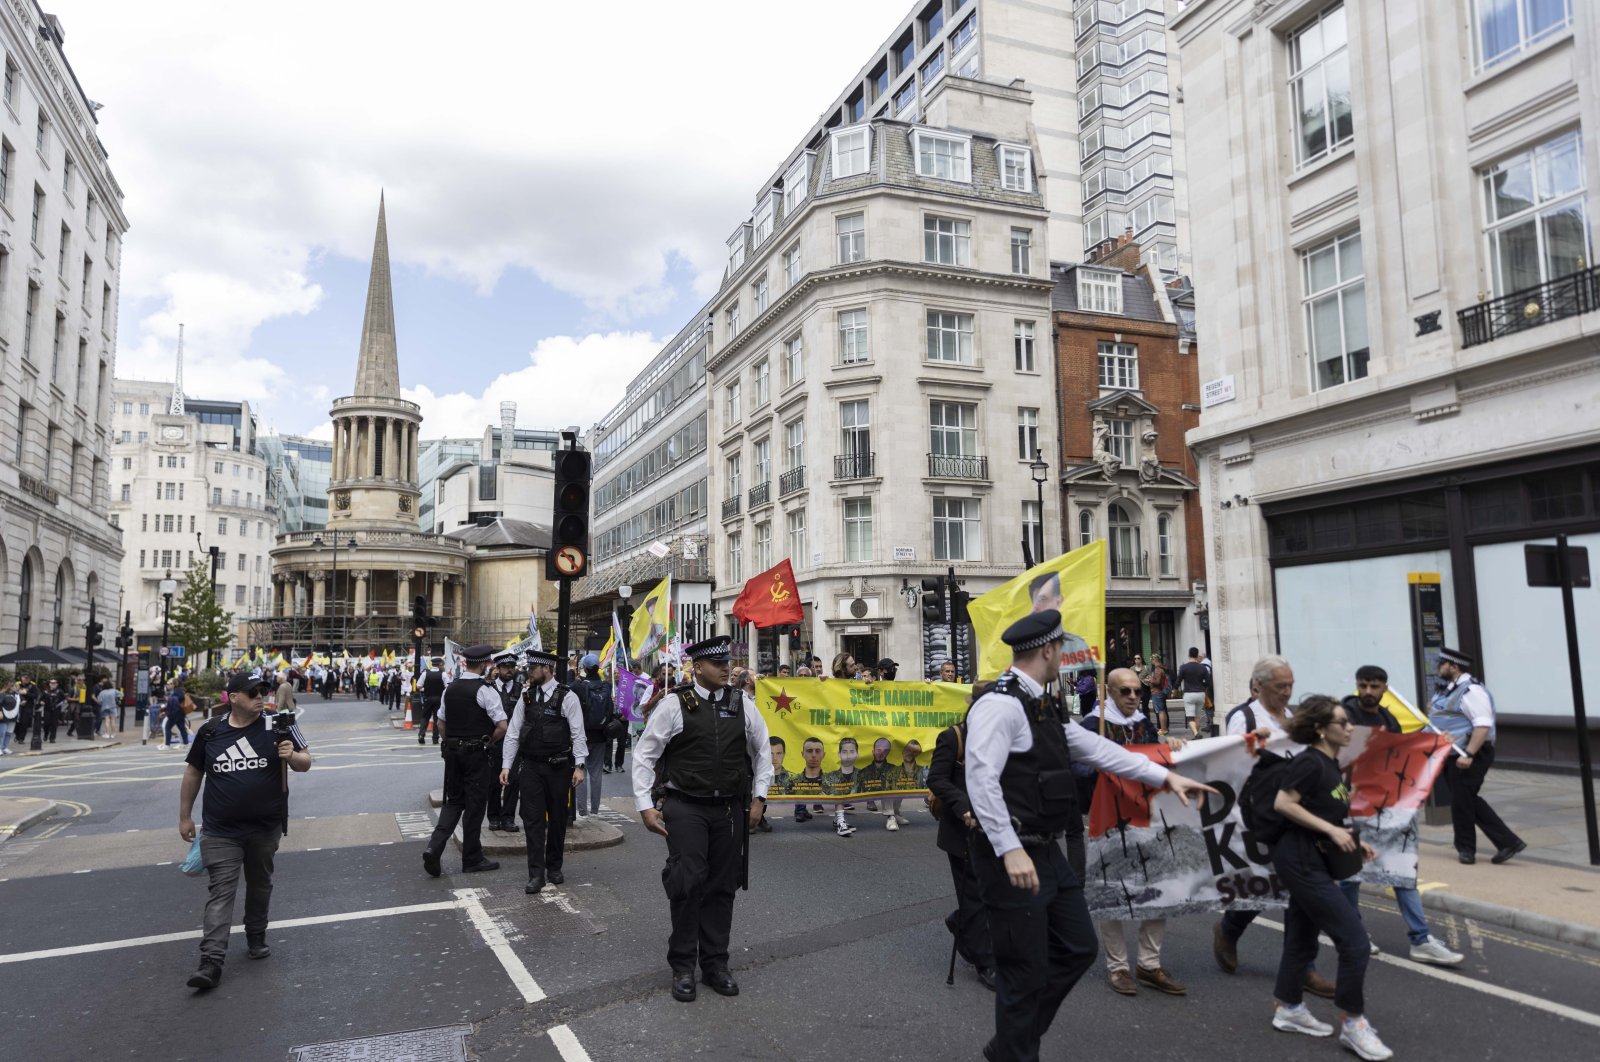 PKK terrorist sympathizers gathered in front of BBC headquarters earlier on Saturday and marched to Downing Street via central London, U.K., June 11, 2022. (AA)